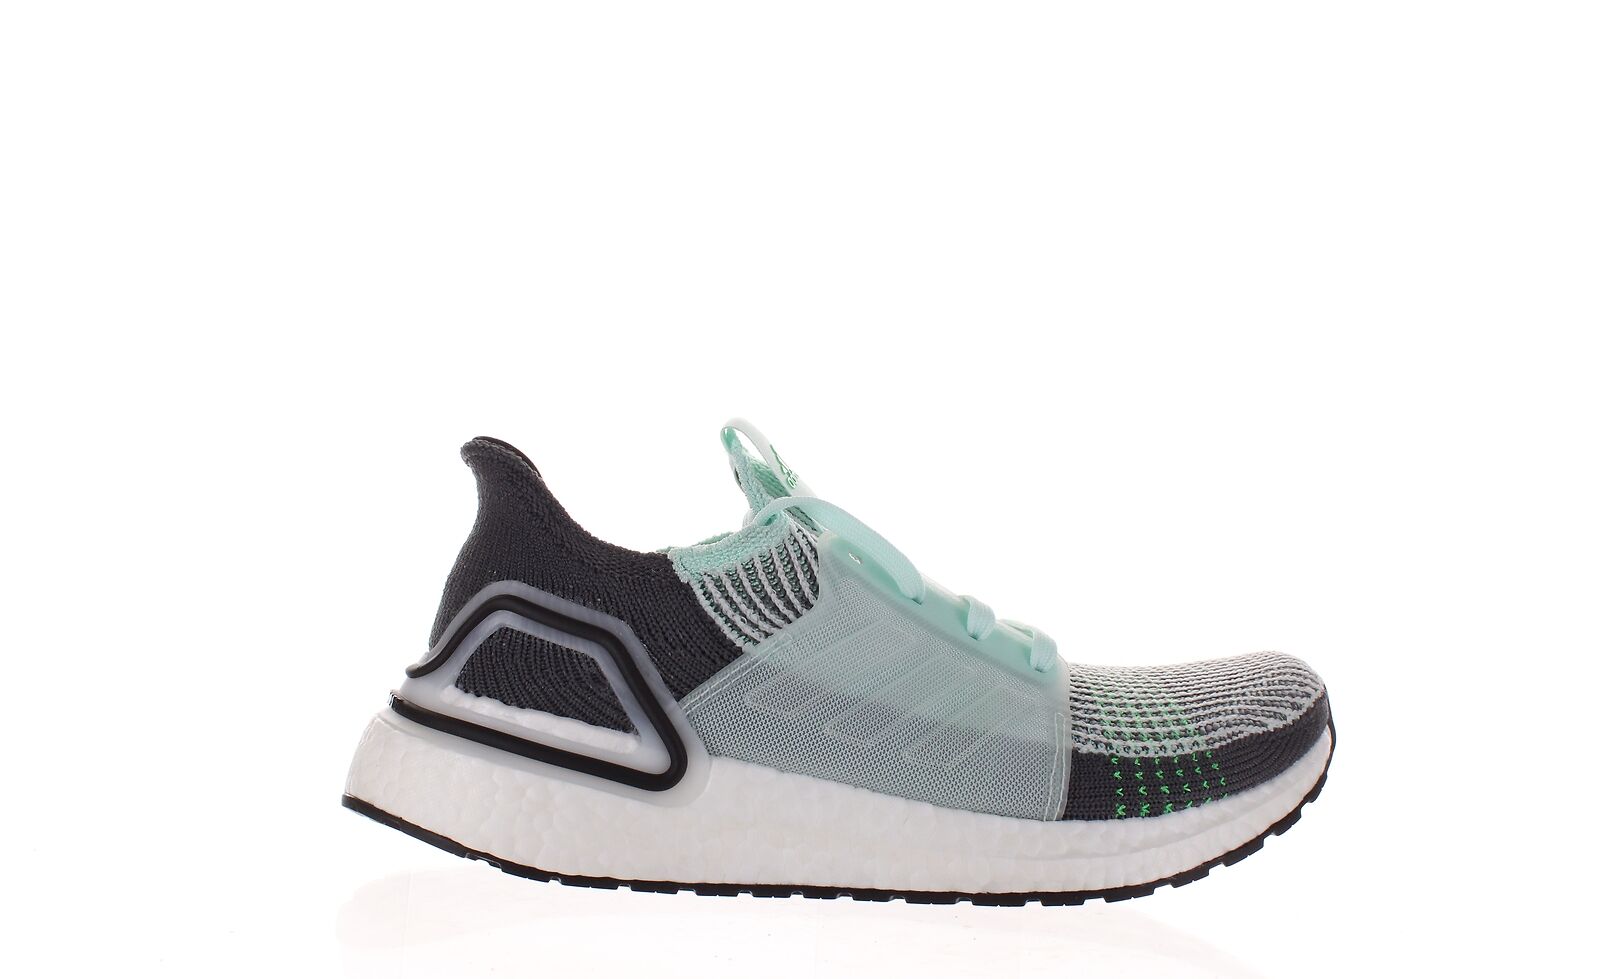 Adidas Mens Ultraboost 19 Ice Mint/Ice Mint/Grey Running Shoes Size 7.5